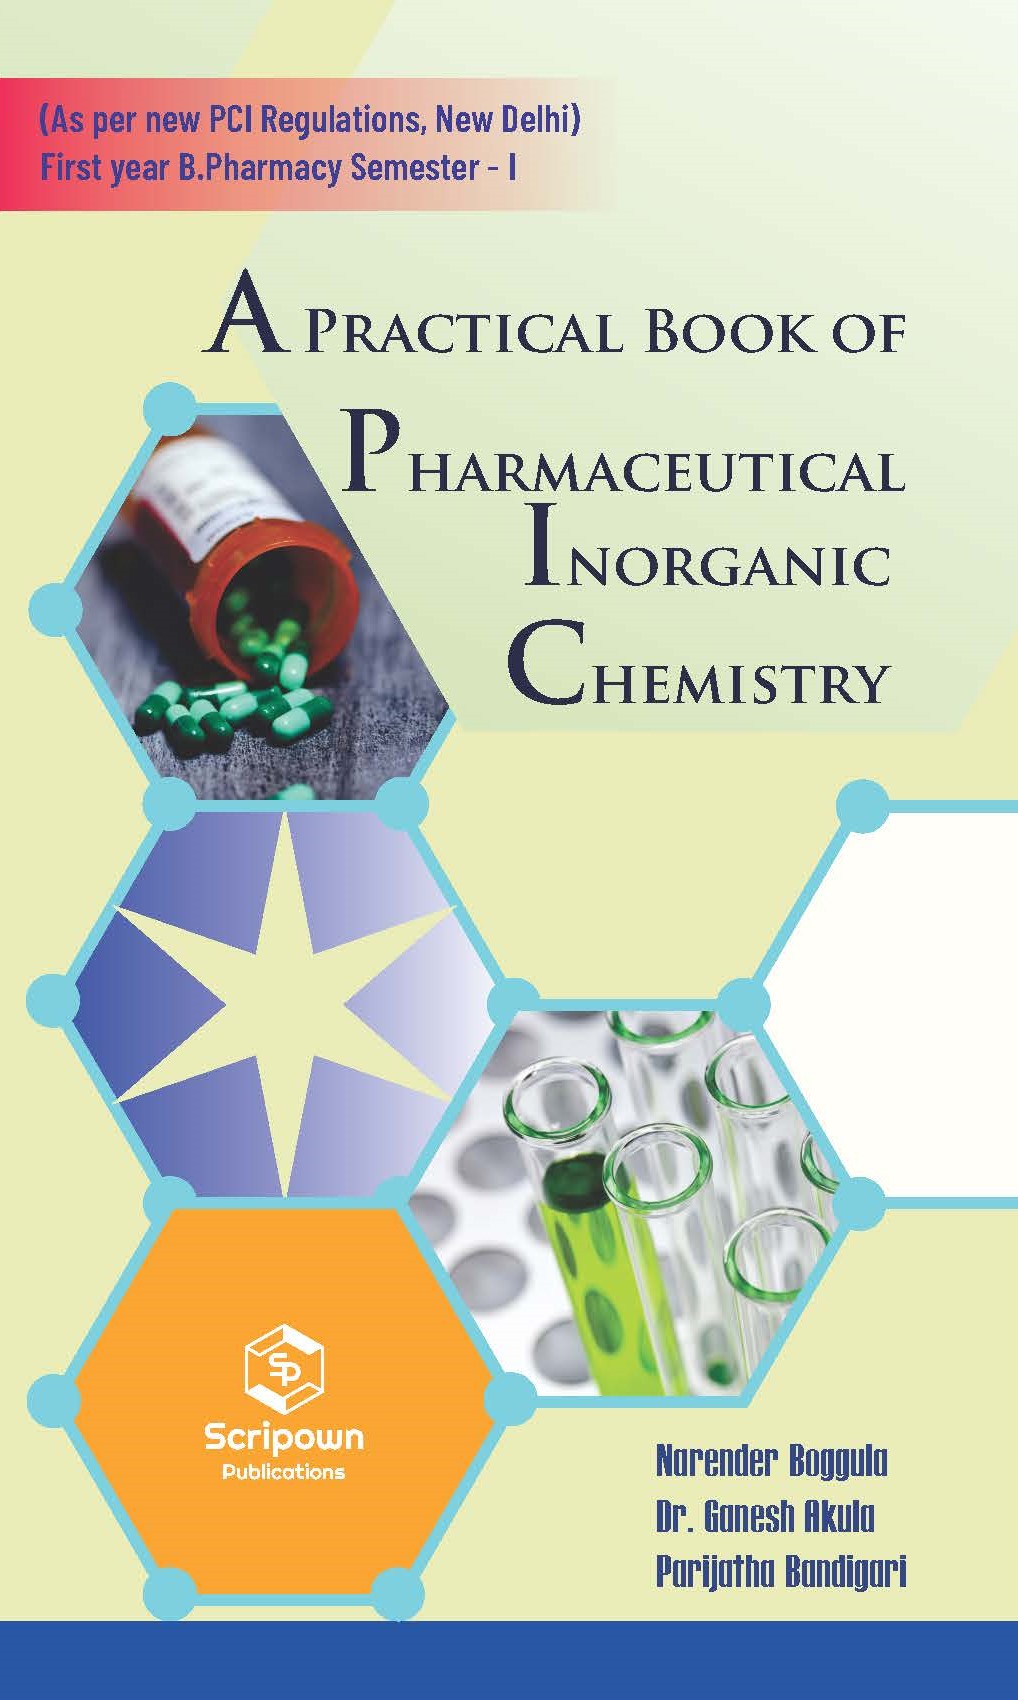 A Practical Book of Pharmaceutical Inorganic Chemistry